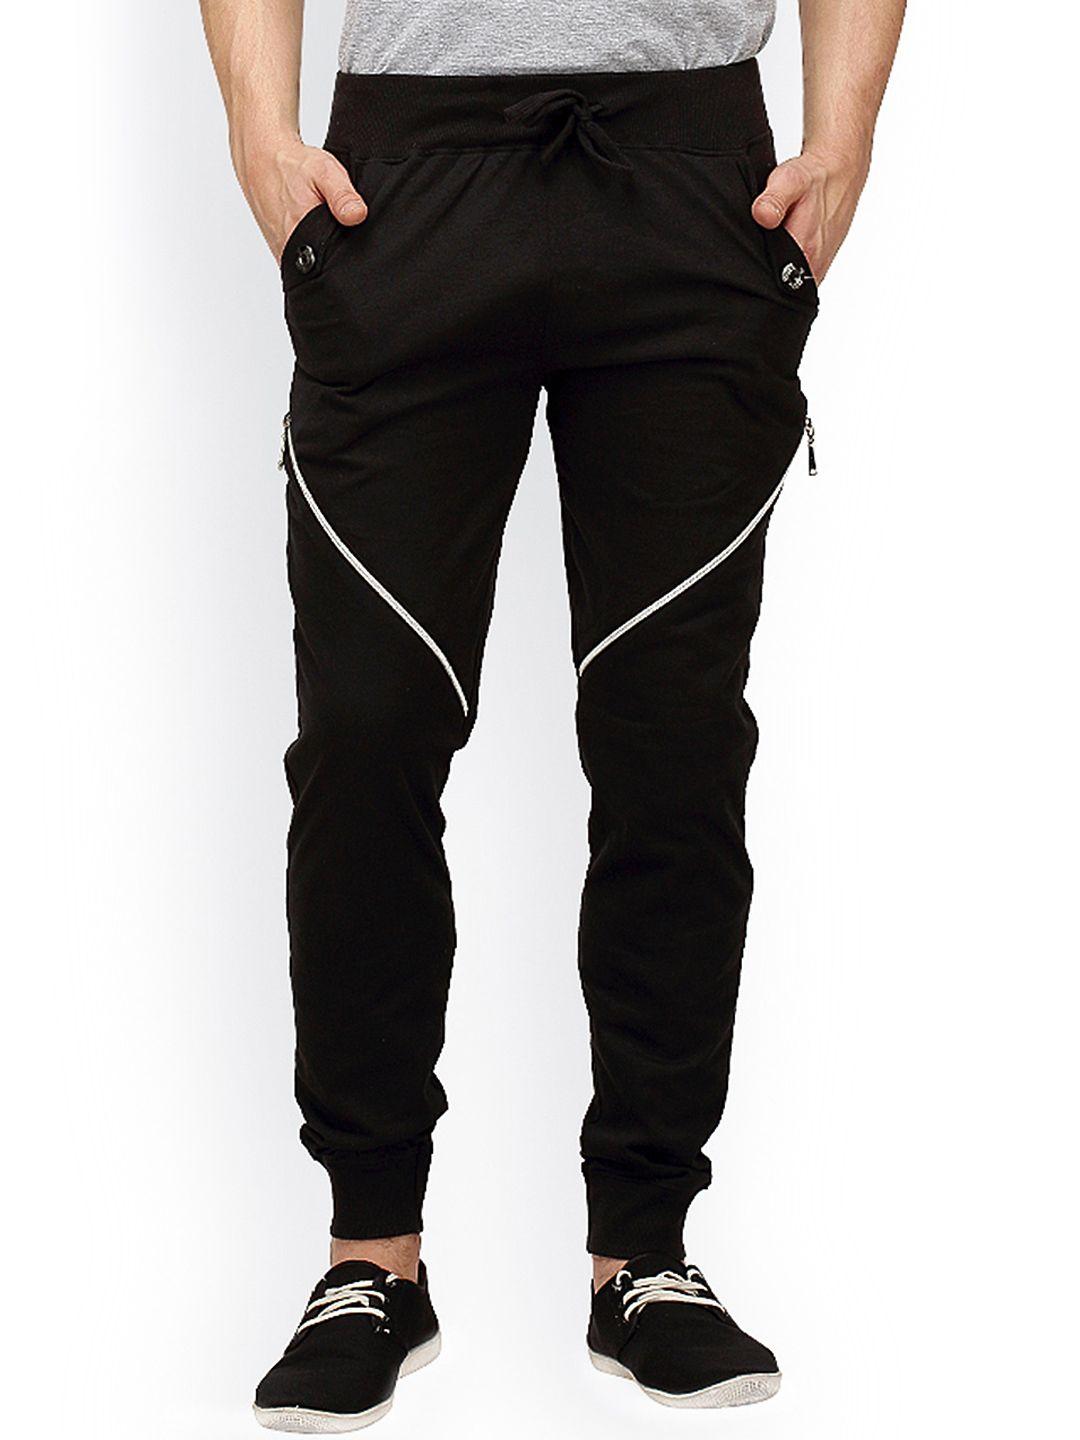 campus-sutra-black-track-pants